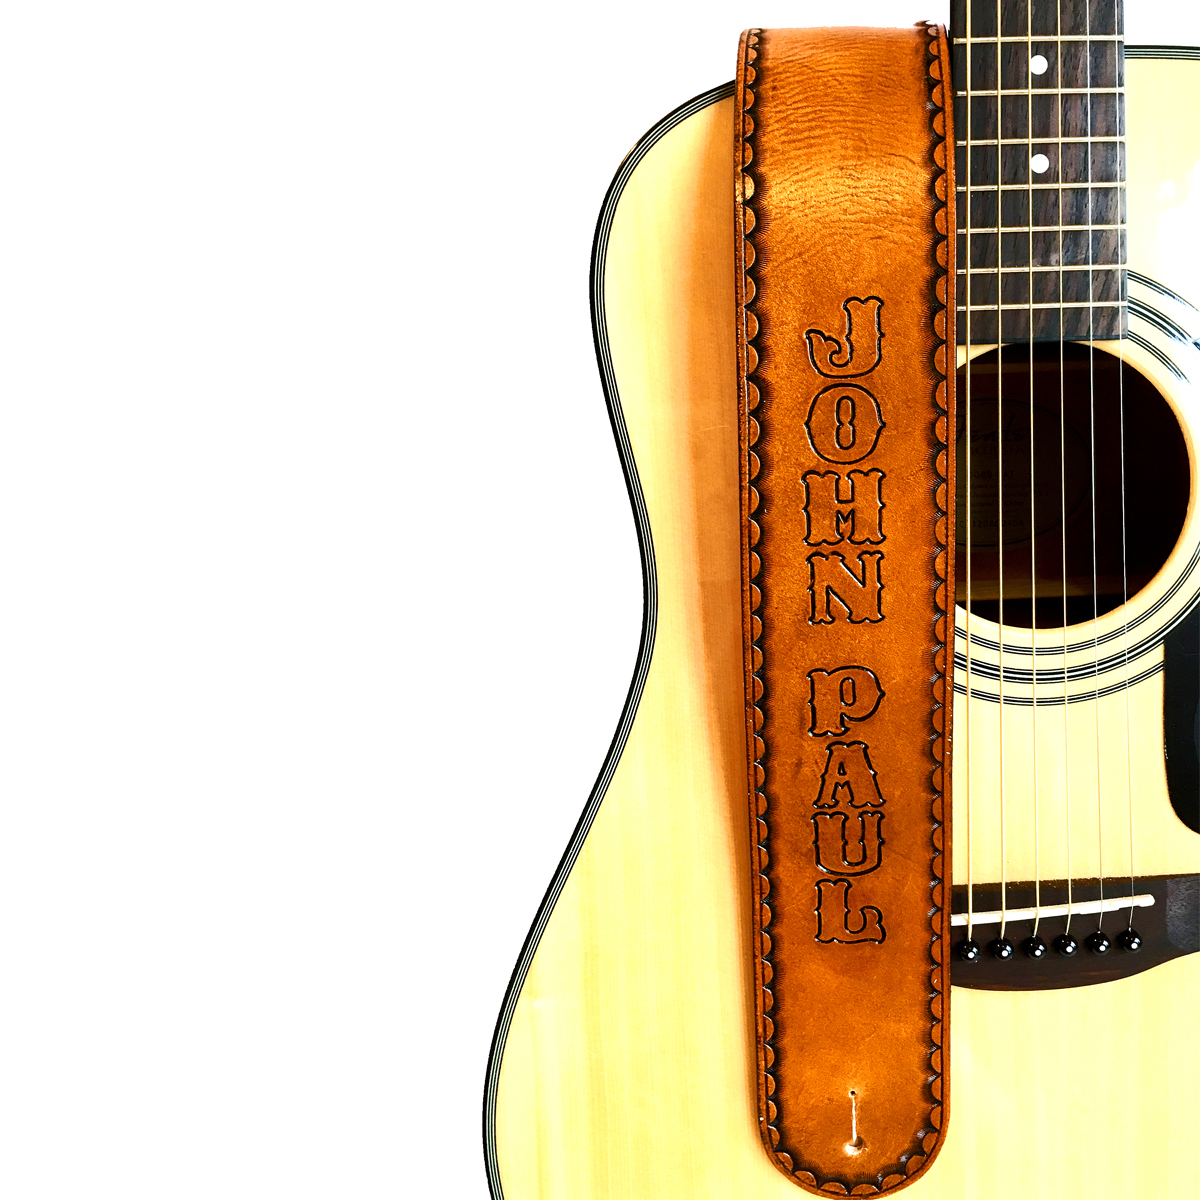 Rustic Personalized Tan Leather Guitar Strap